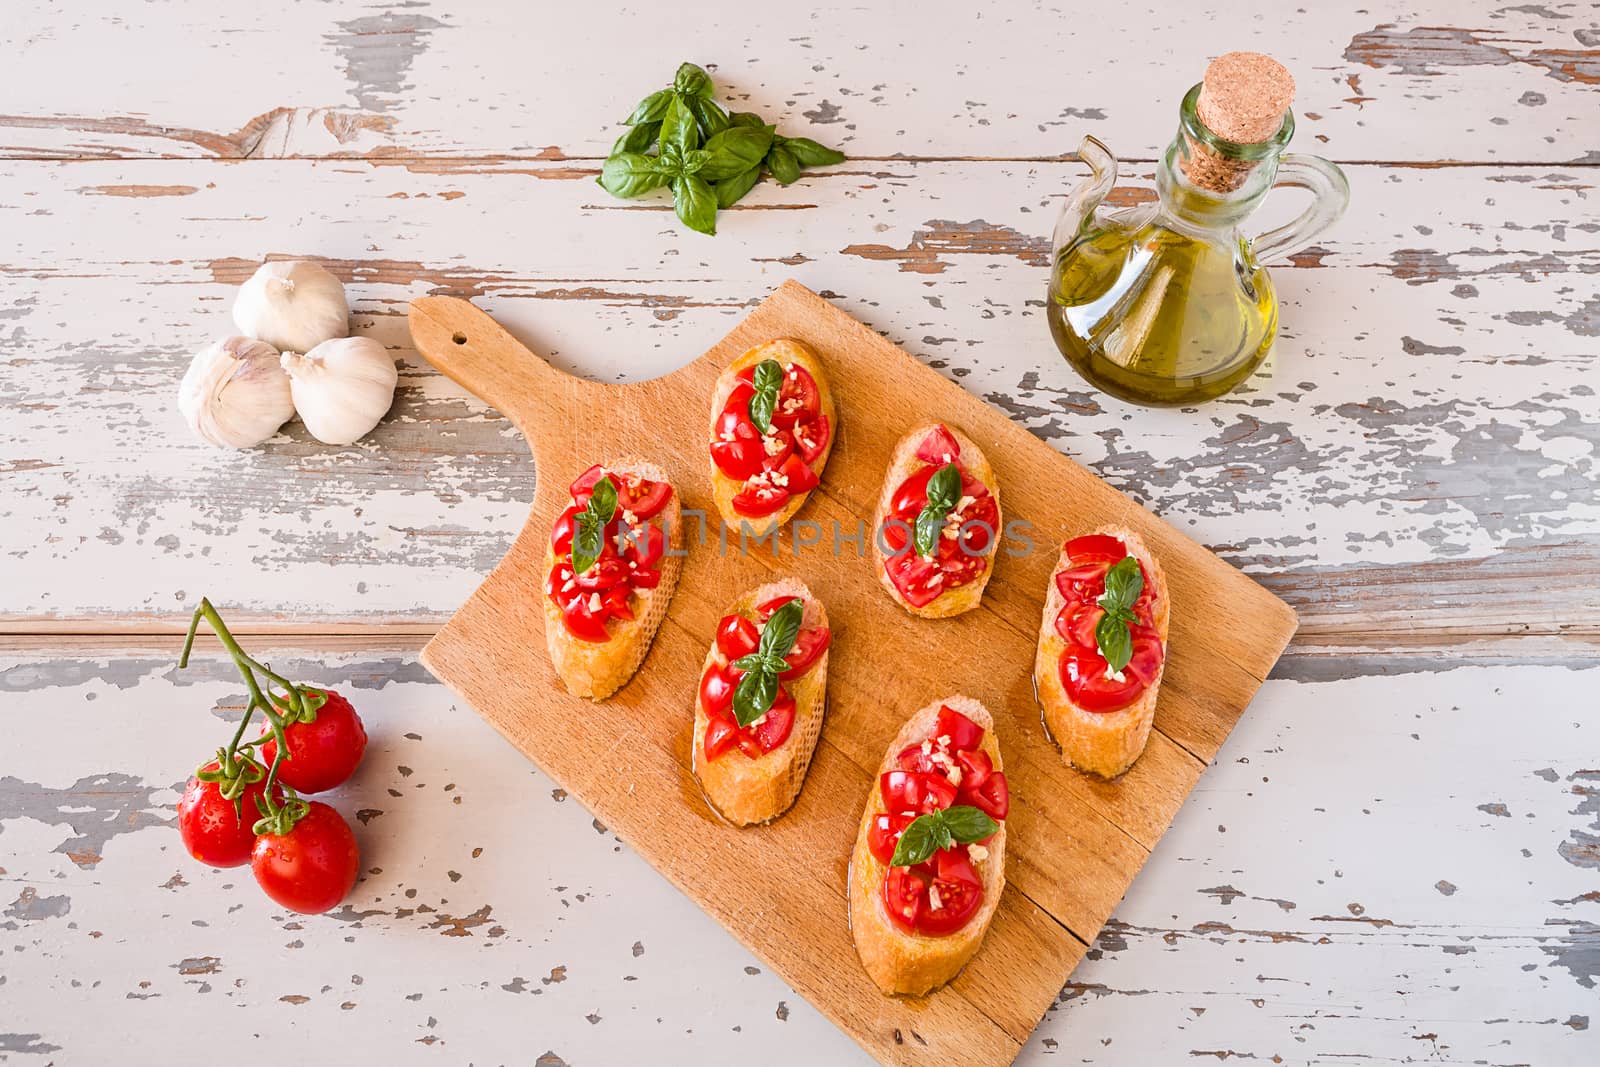 Italian bruschetta with tomato, basil and garlic seen from above on a chopping board